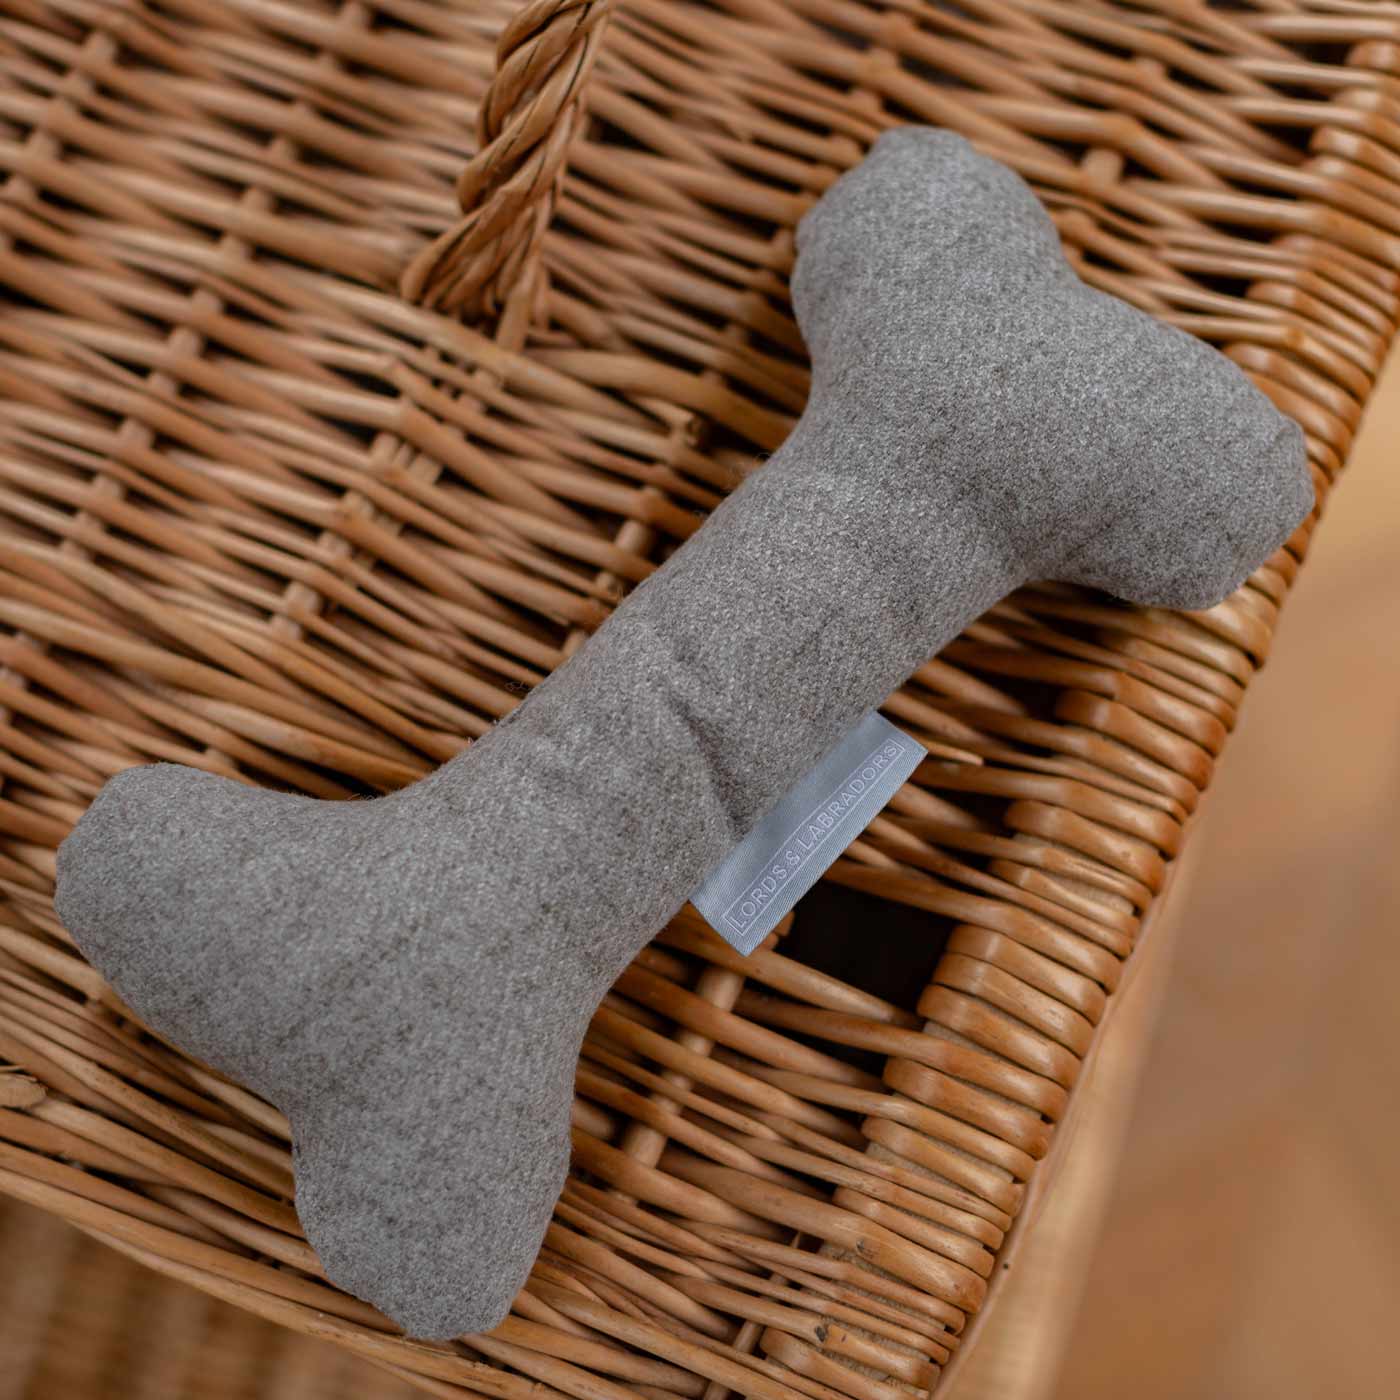 Present the perfect pet play-time with our luxury dog bone toy in stunning Inchmurrin Ground Dark Grey! Available to personalise now at Lords & Labradors, Shop Luxury Dog Toys Online